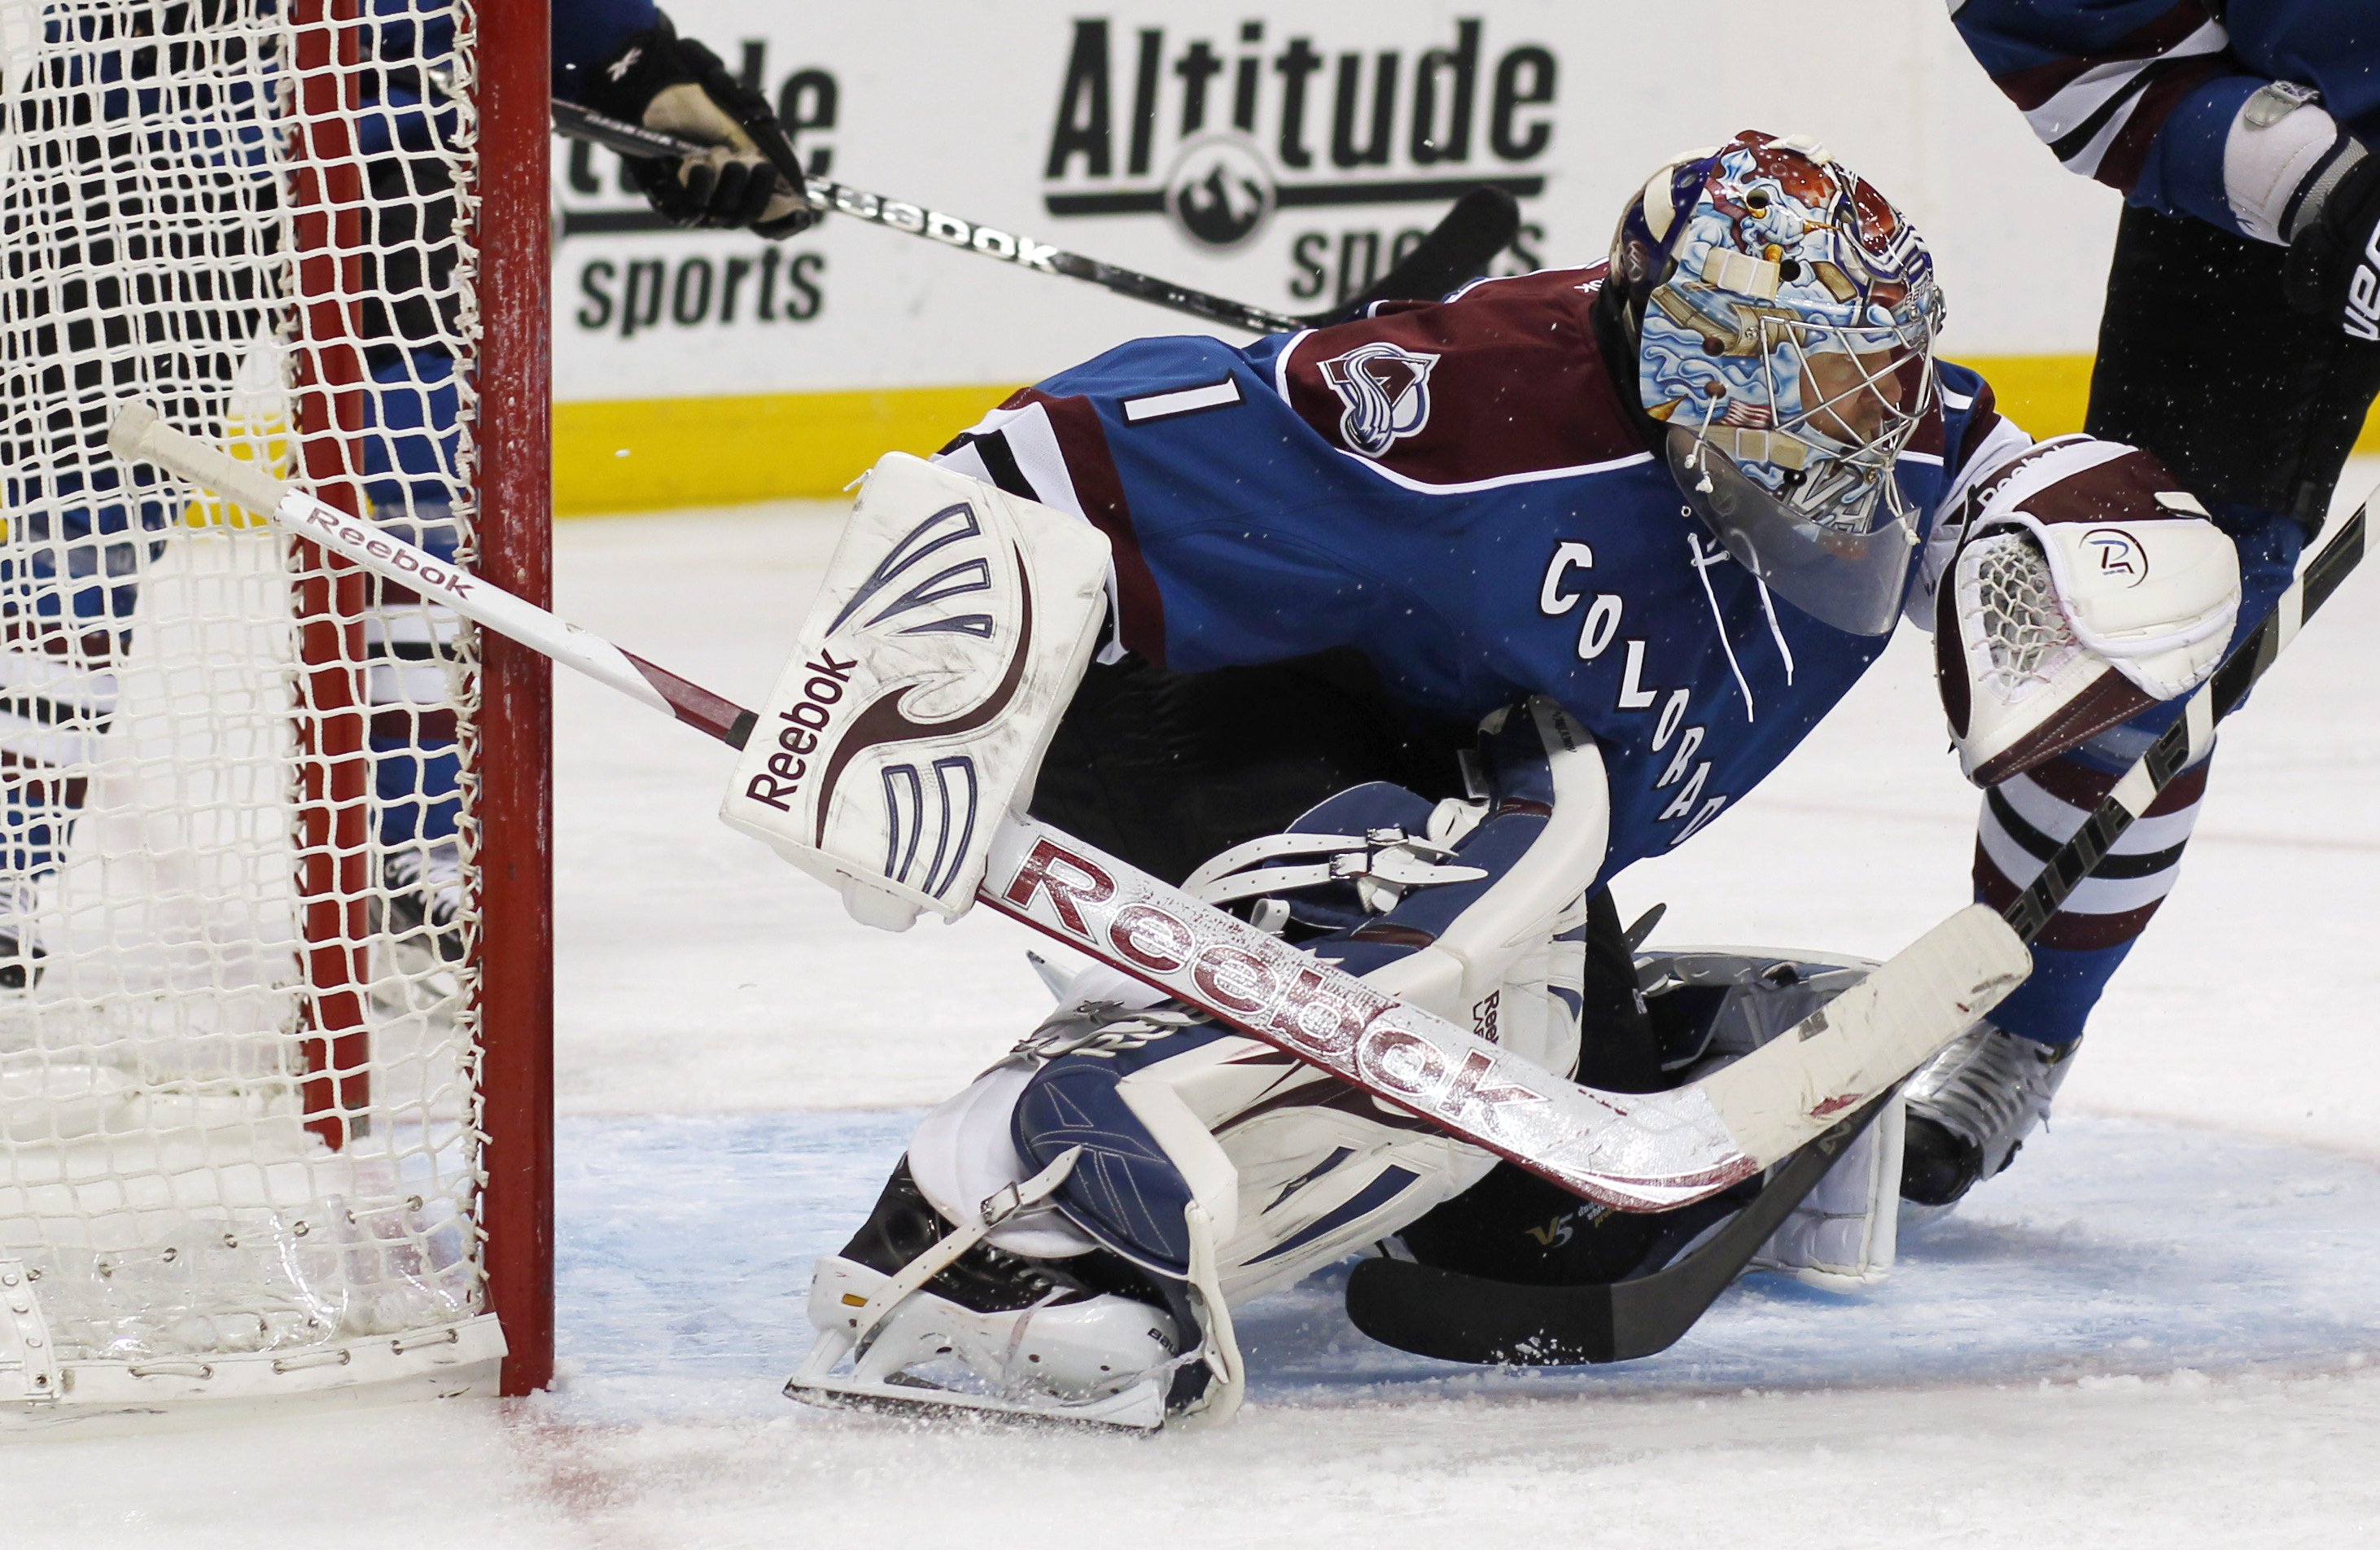 colorado, Avalanche, Nhl, Hockey, 72 Wallpapers HD / Desktop and Mobile